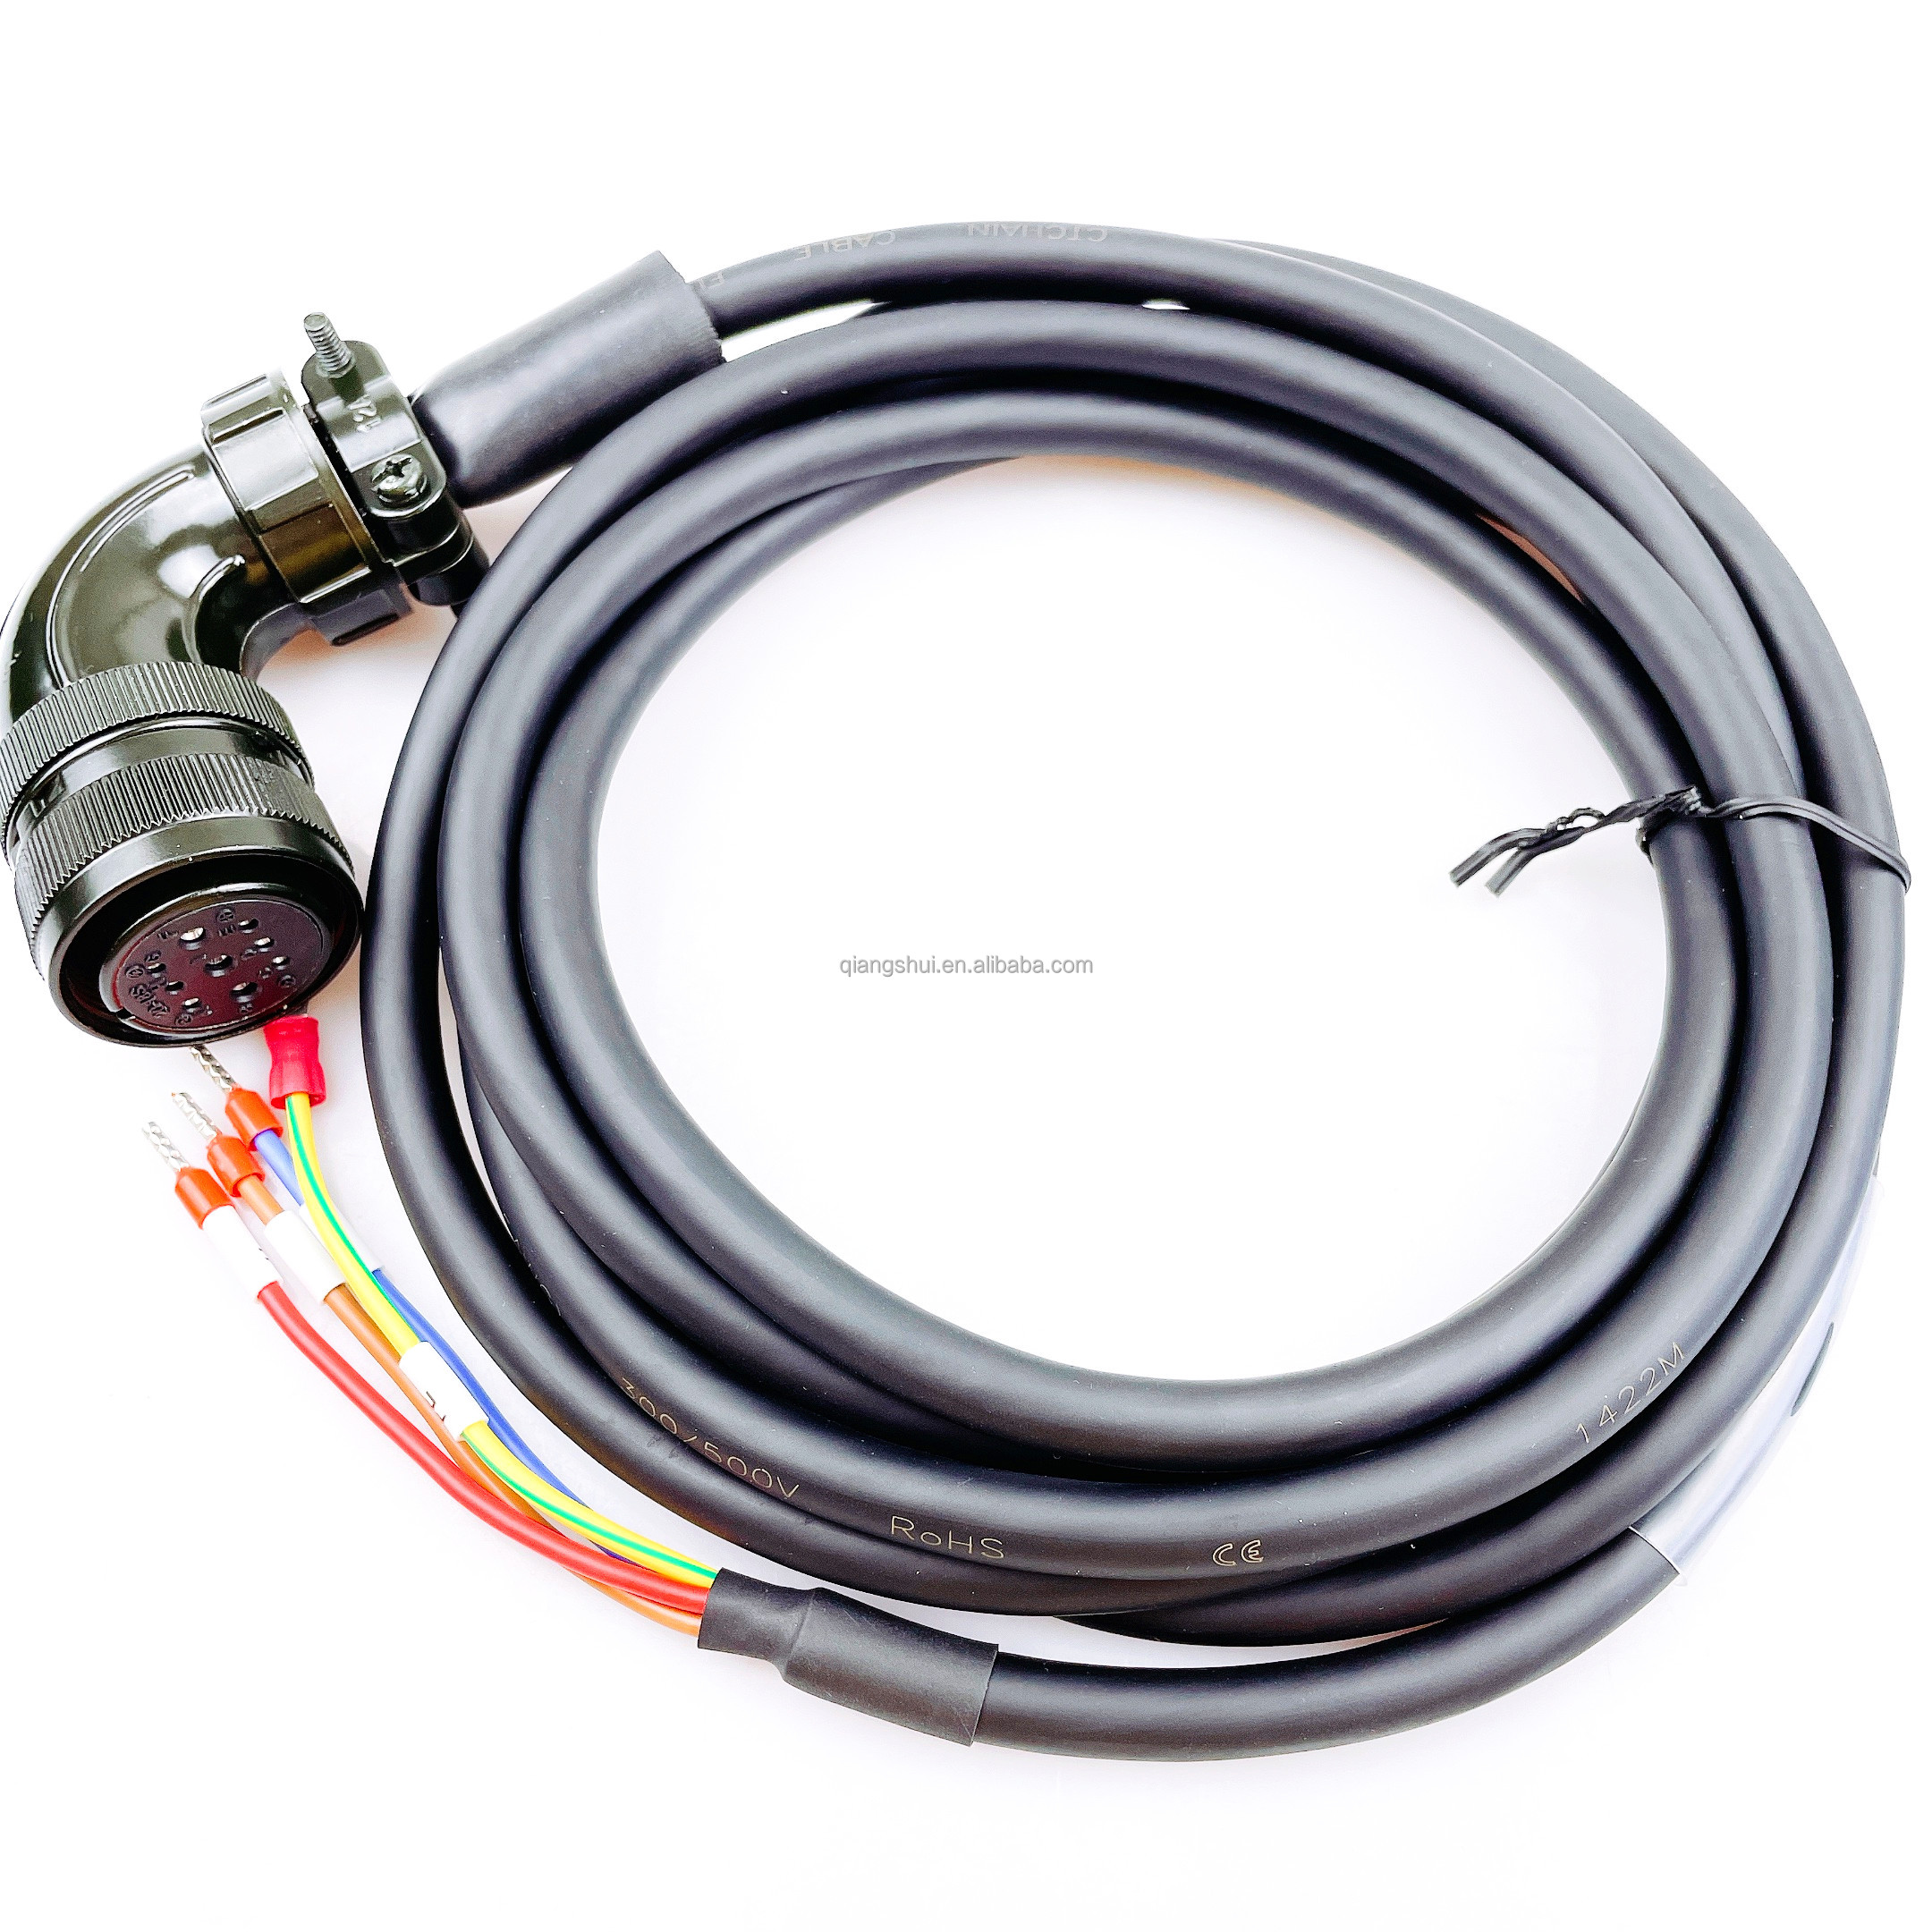 Servo Drive Power cable 15m. 1.5mm²/ AWG16. for servo motors MS1H2 =5KW. MS1H3 = 1.8kW